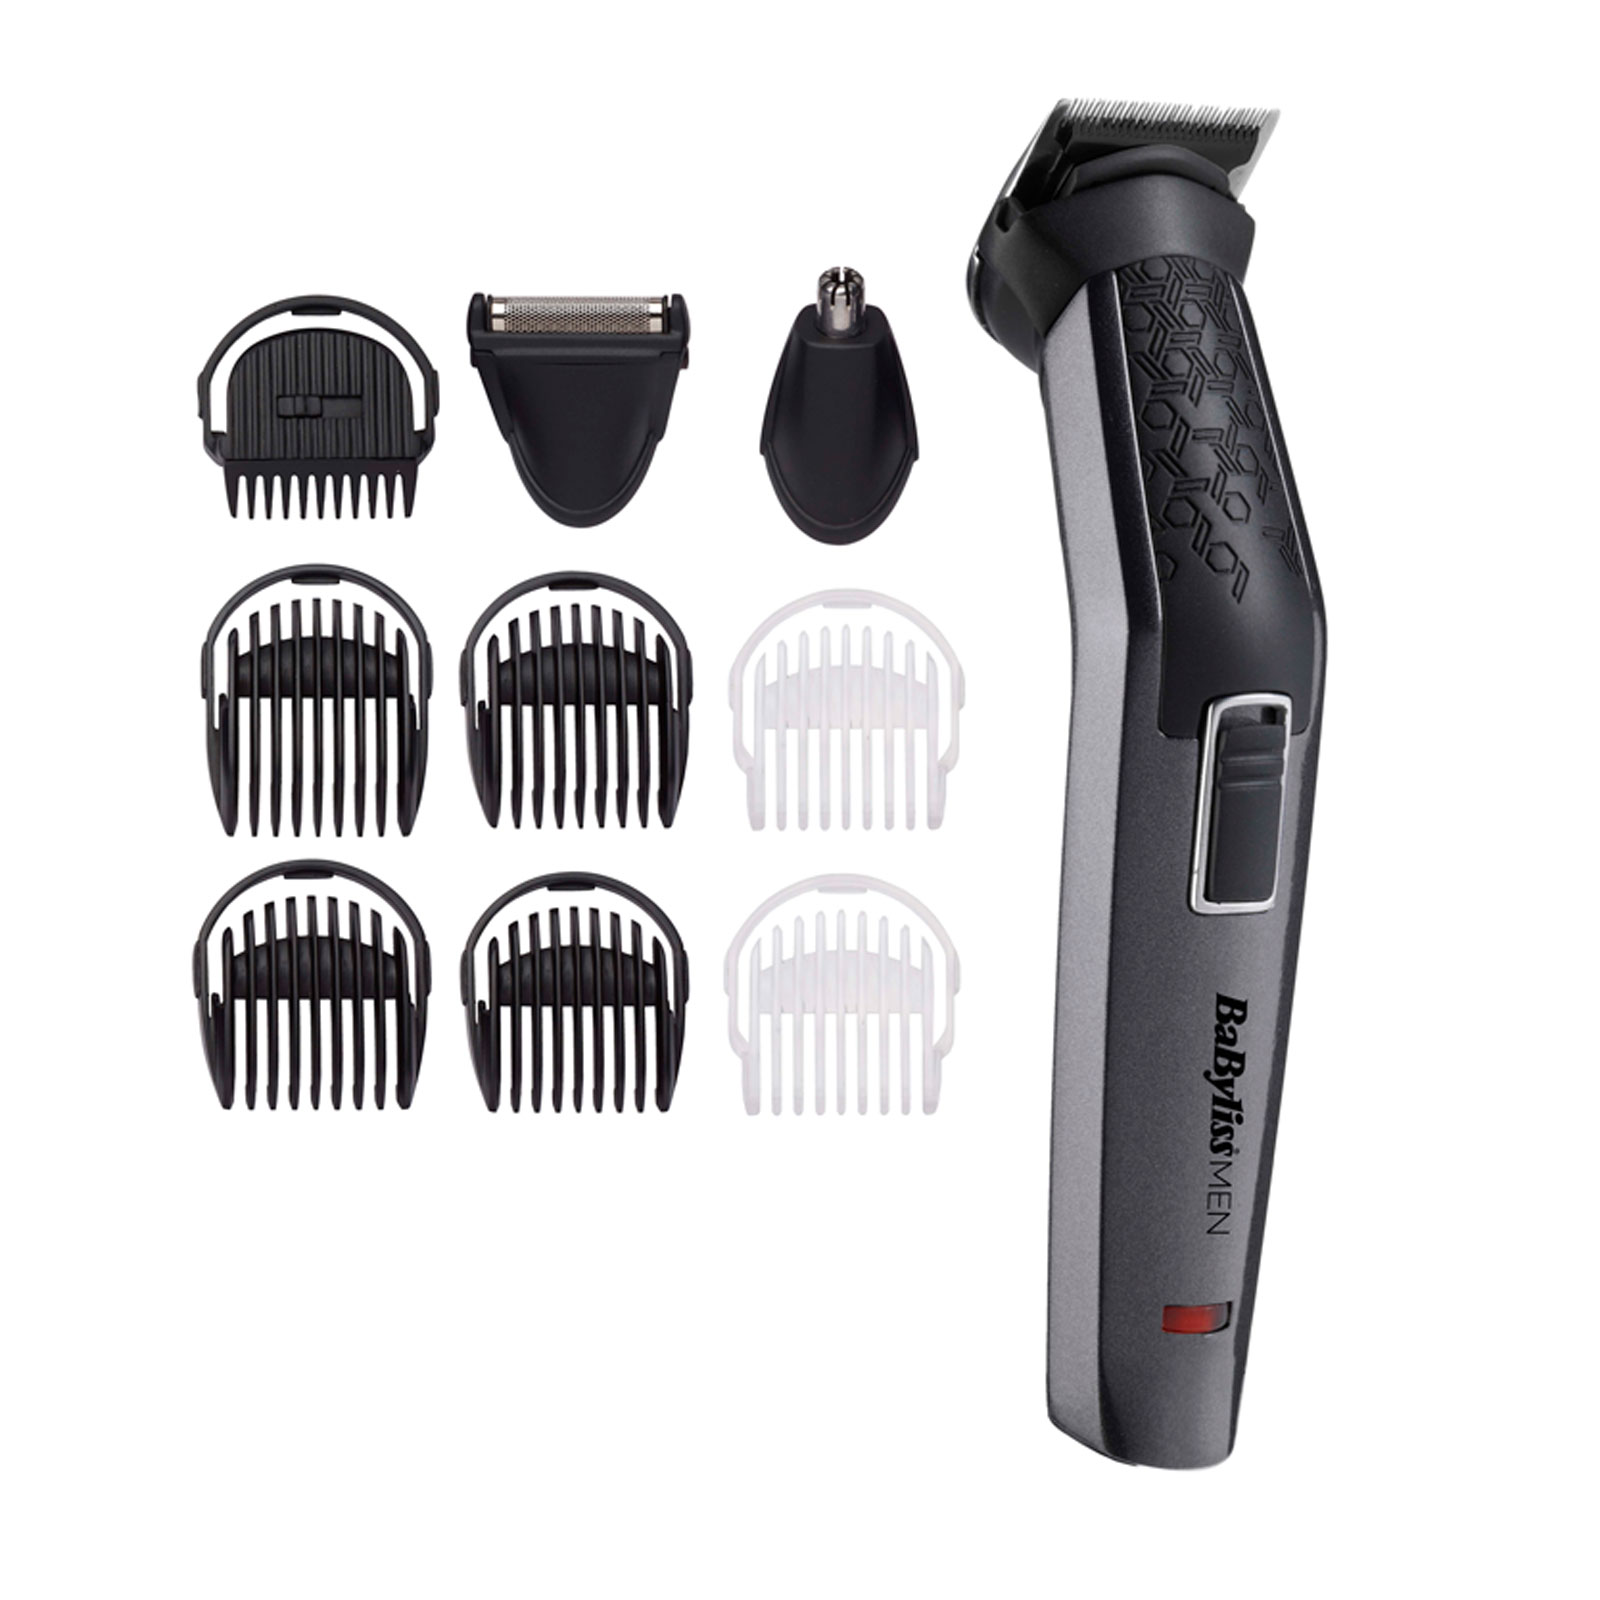 Babyliss MT727E Multi-Grooming-Kit 10-in-1 Titan Carbon Trimmer